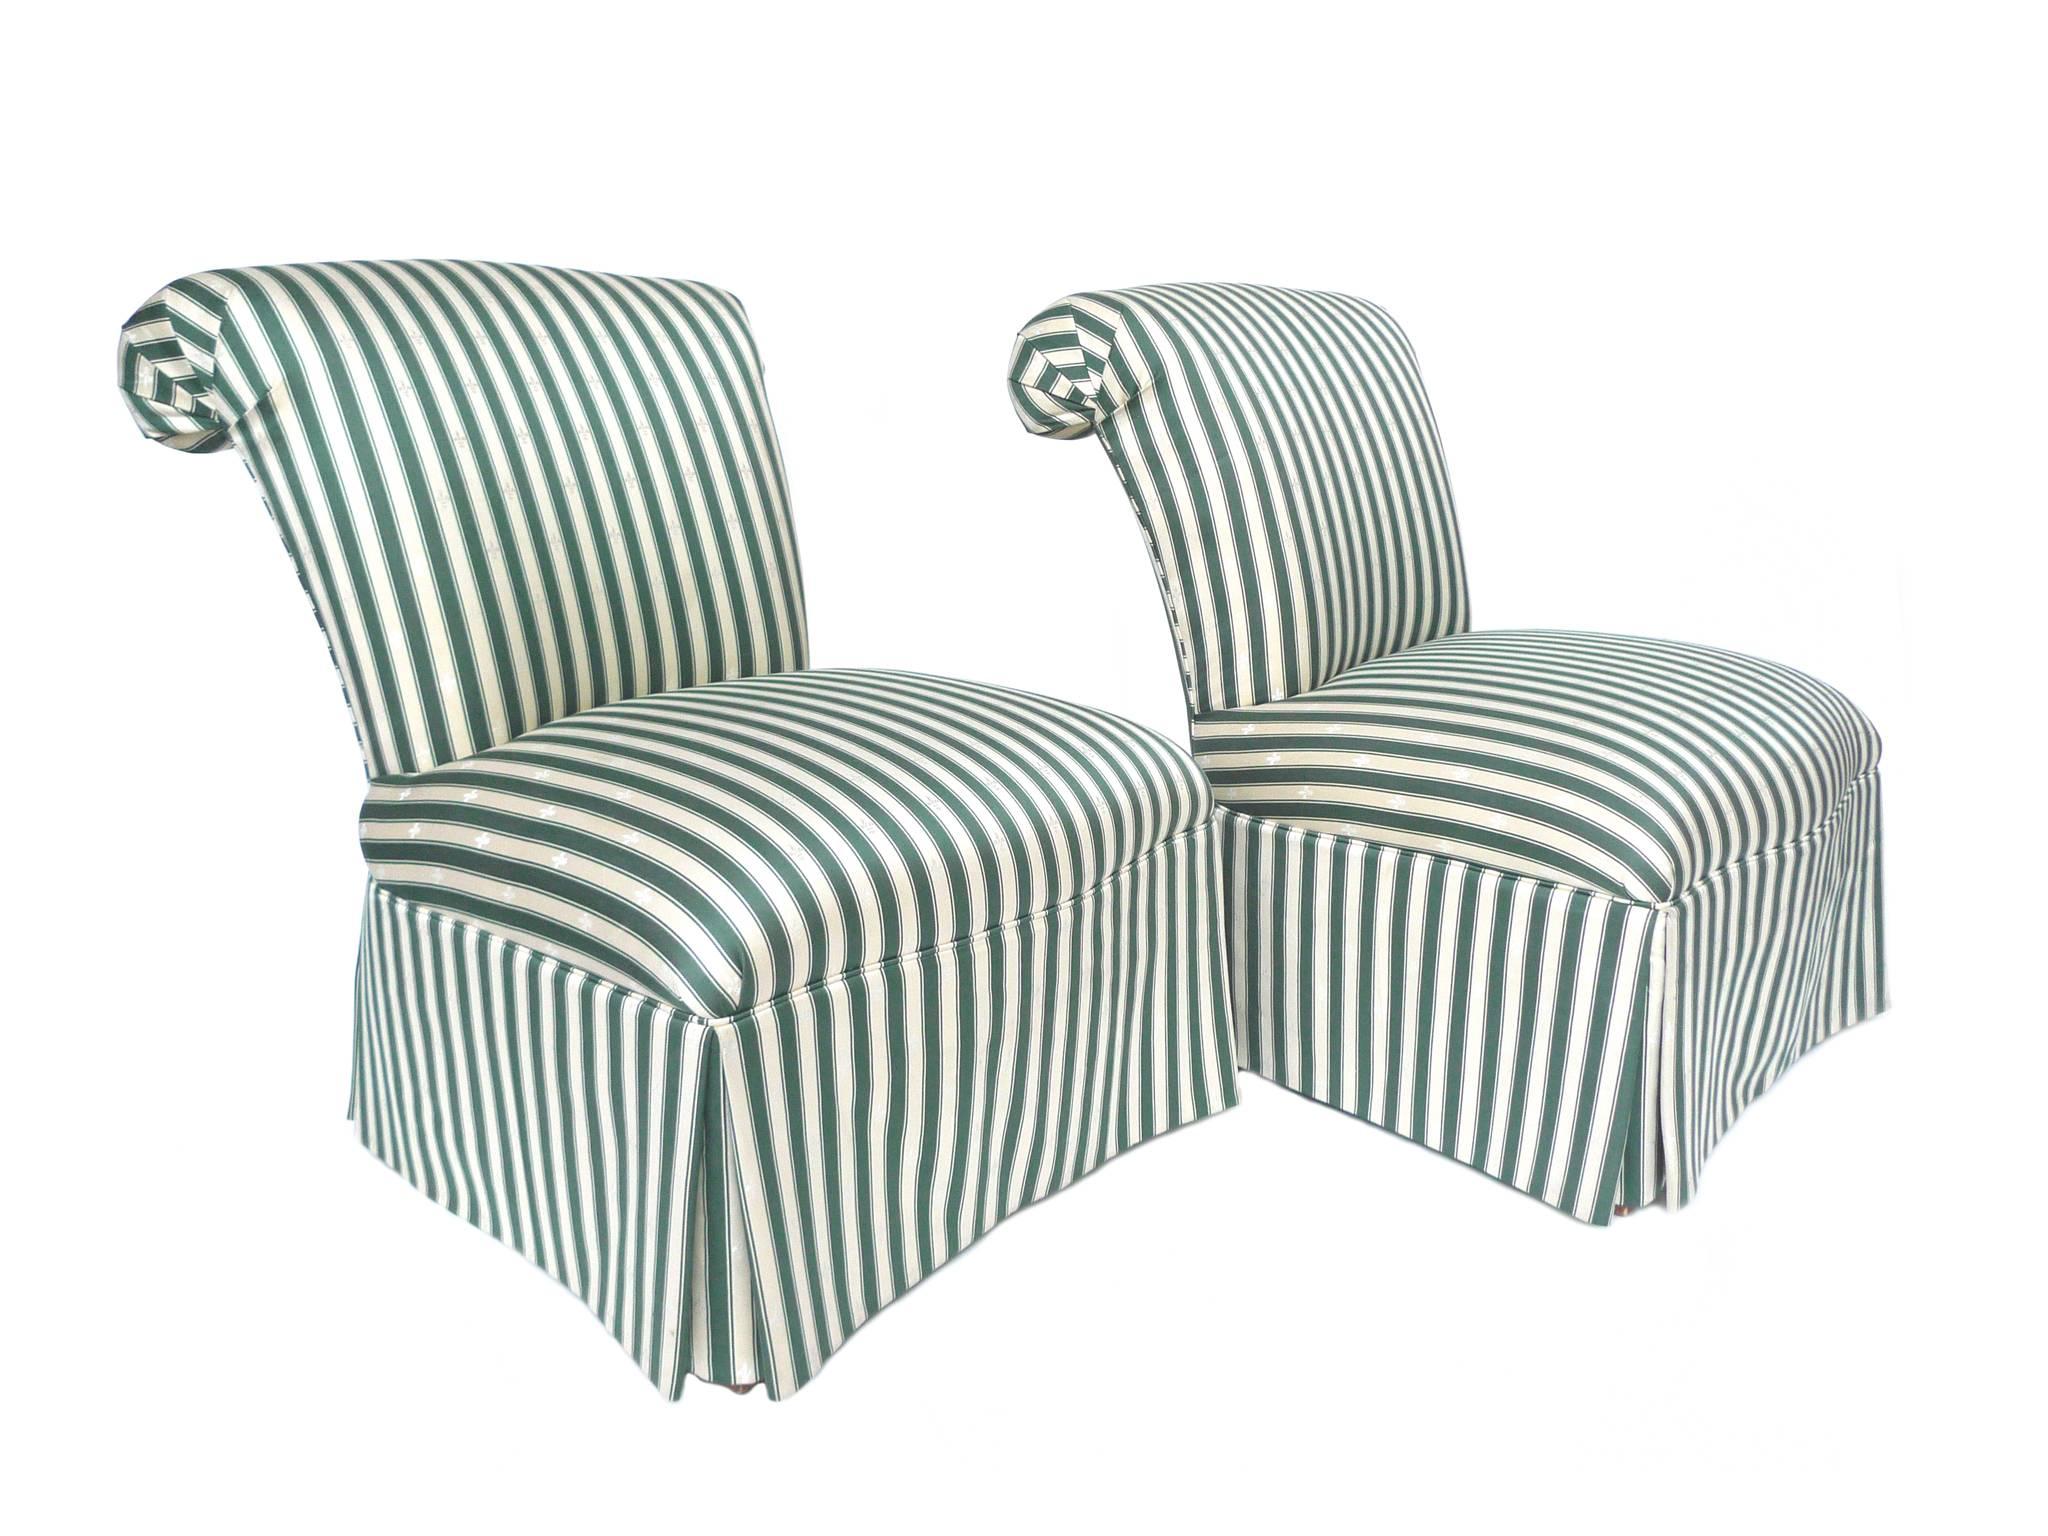 This pair of slipper chairs was manufactured by Henredon as part of their Schoonbeck Collection. The chairs are upholstered in a striped silk, in a green-and-champagne palette with embroidered fleur-de-lis patterning. Other design details include a